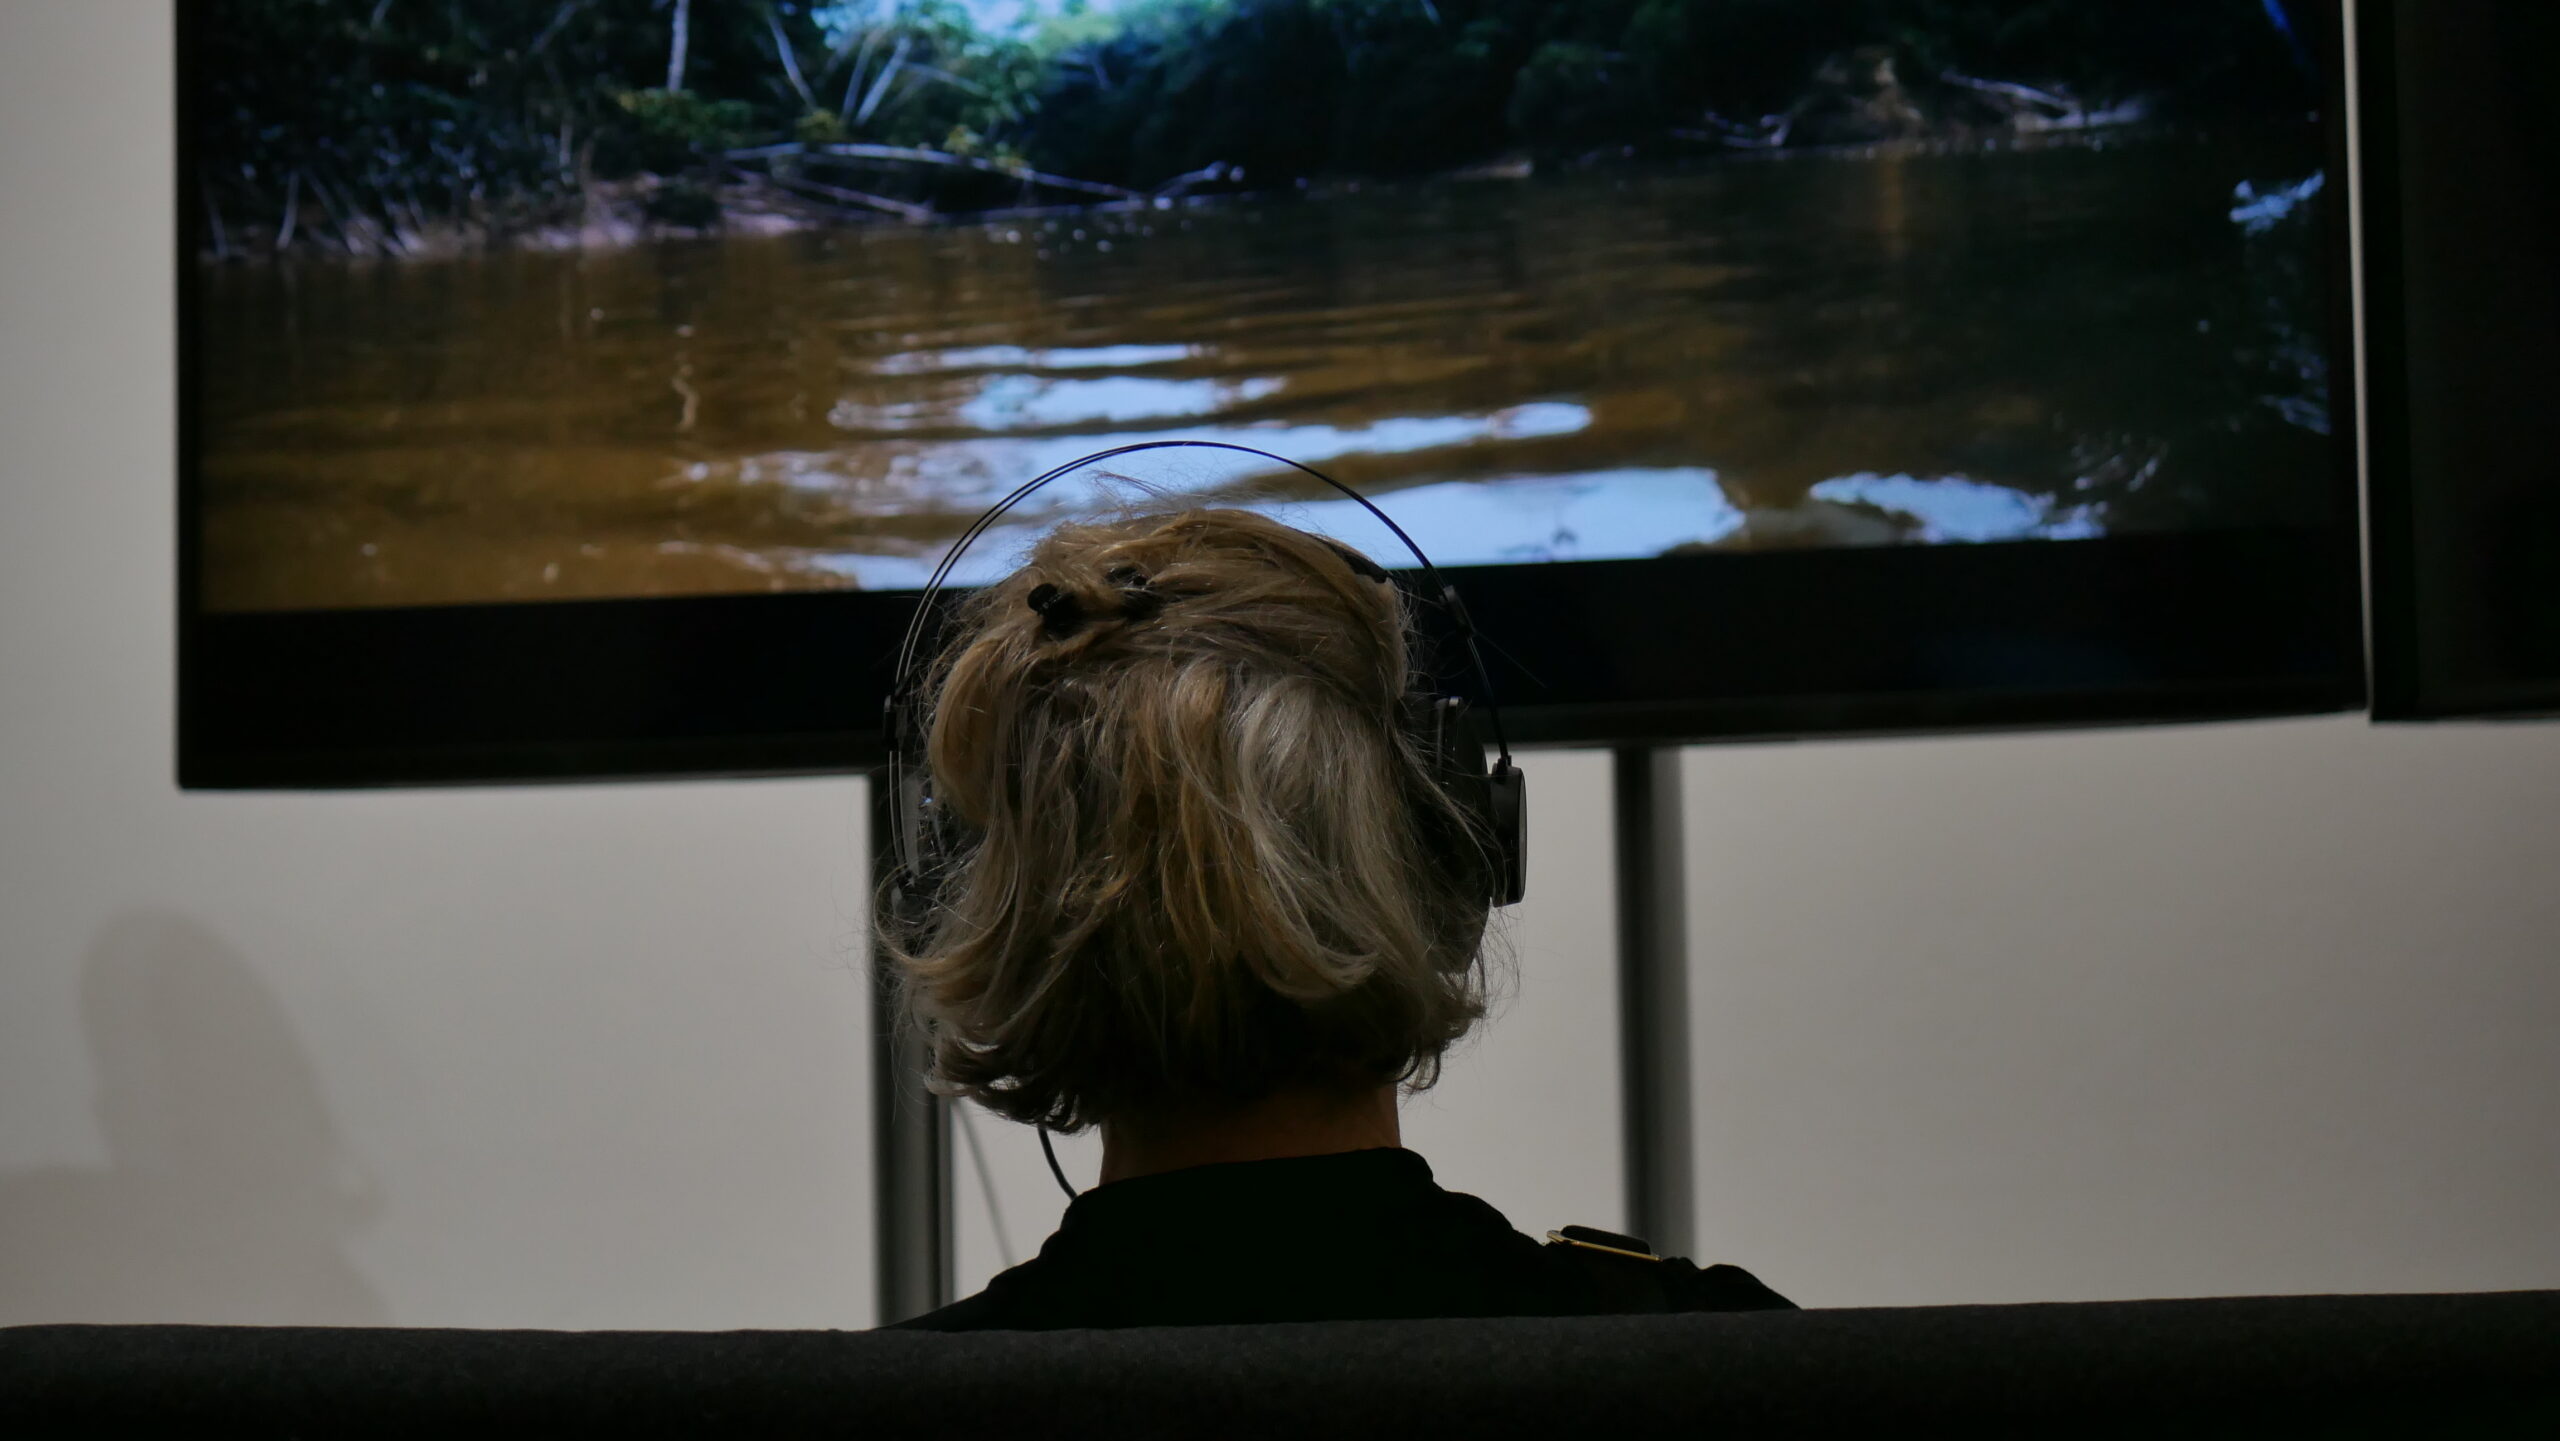 Back of person's head with headphones on watching video on screen of river